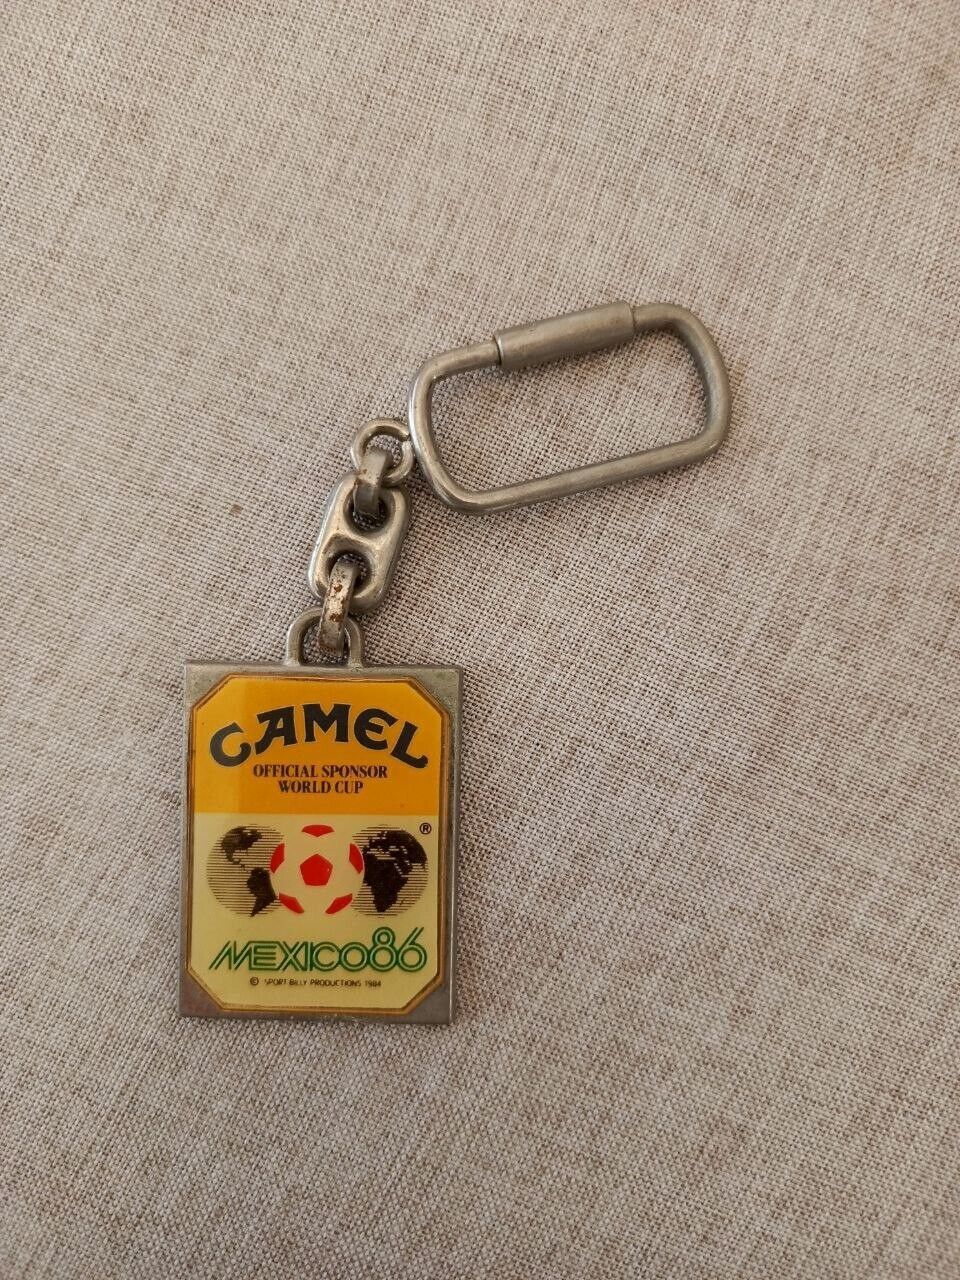 Keychain World Cup Mexico 86